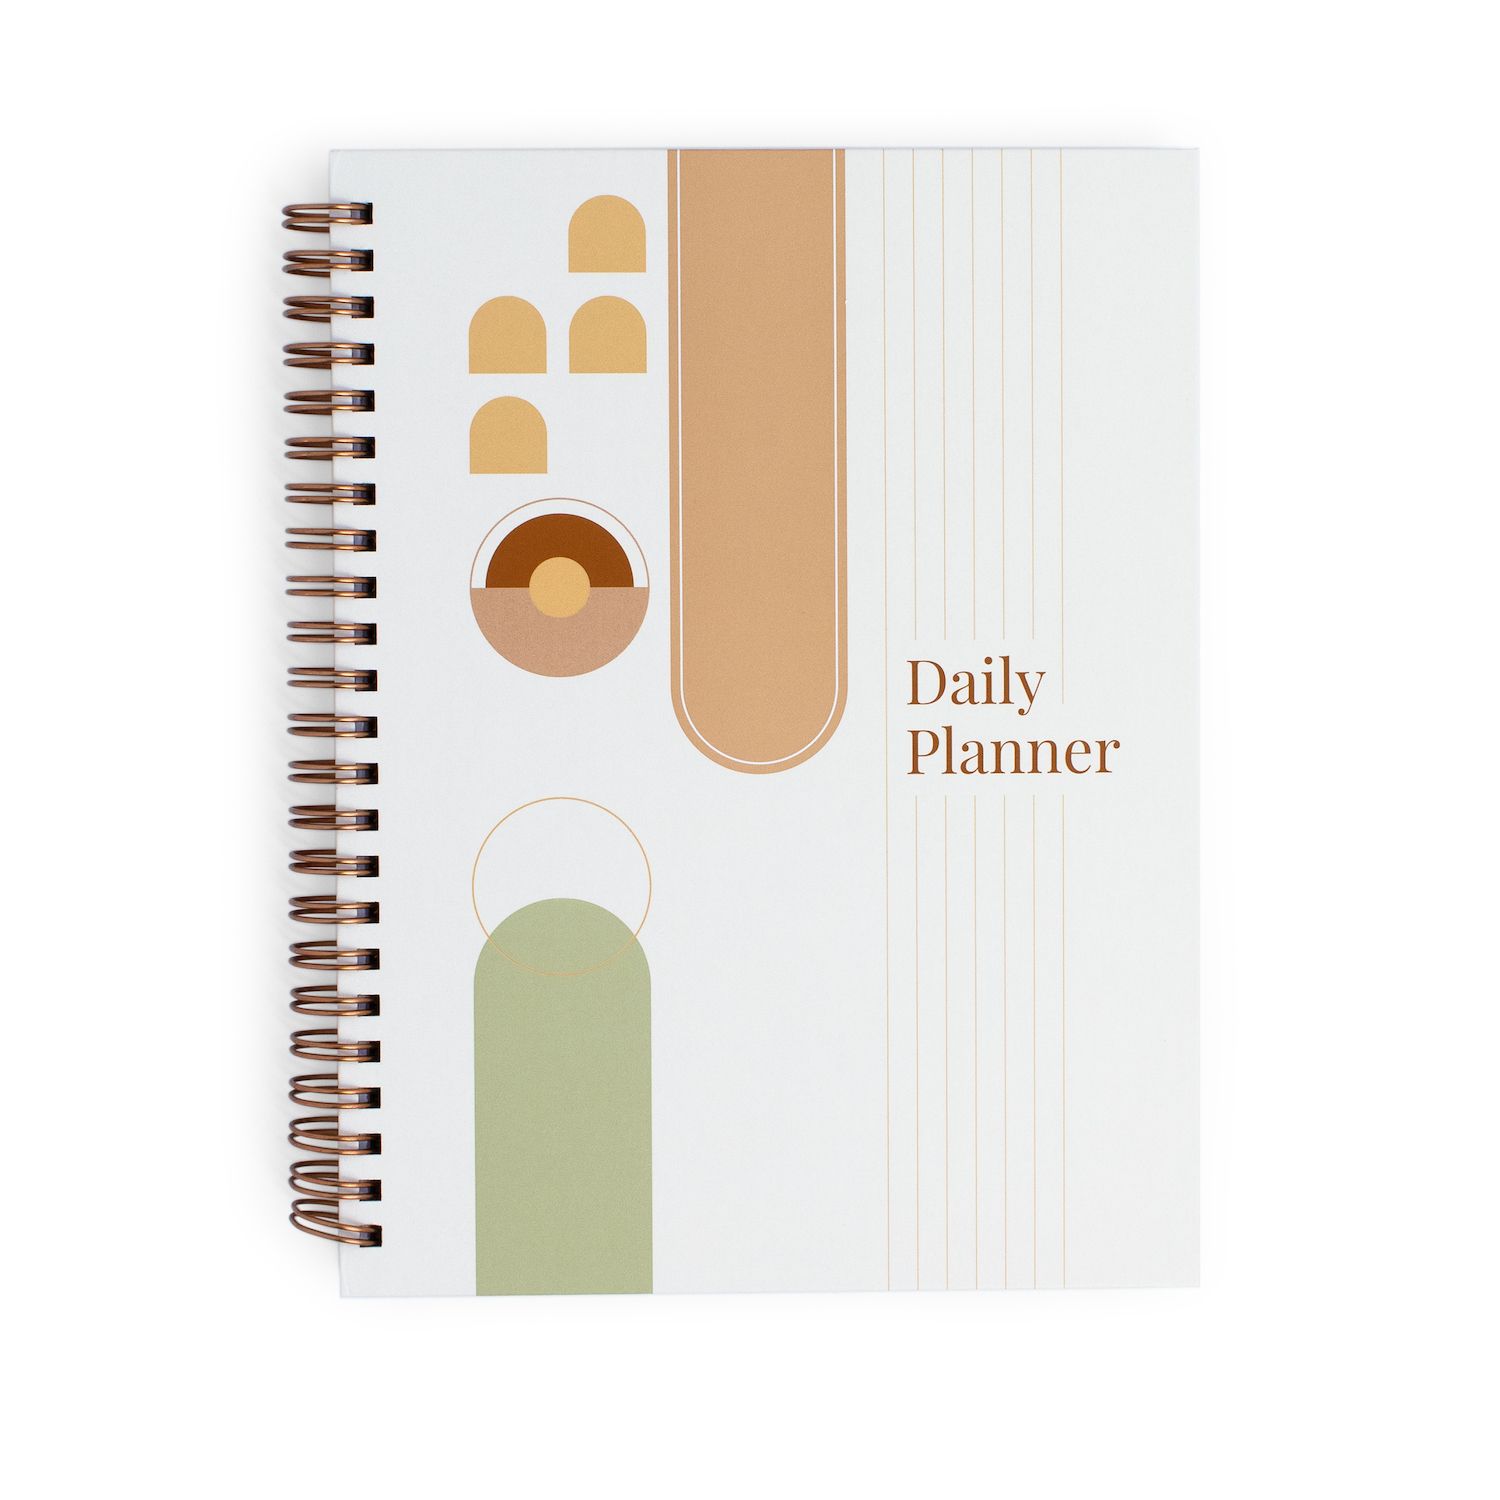 Rileys Co Dotted Journal Notebook, Hardcover Be the Best You Motivational  Journal